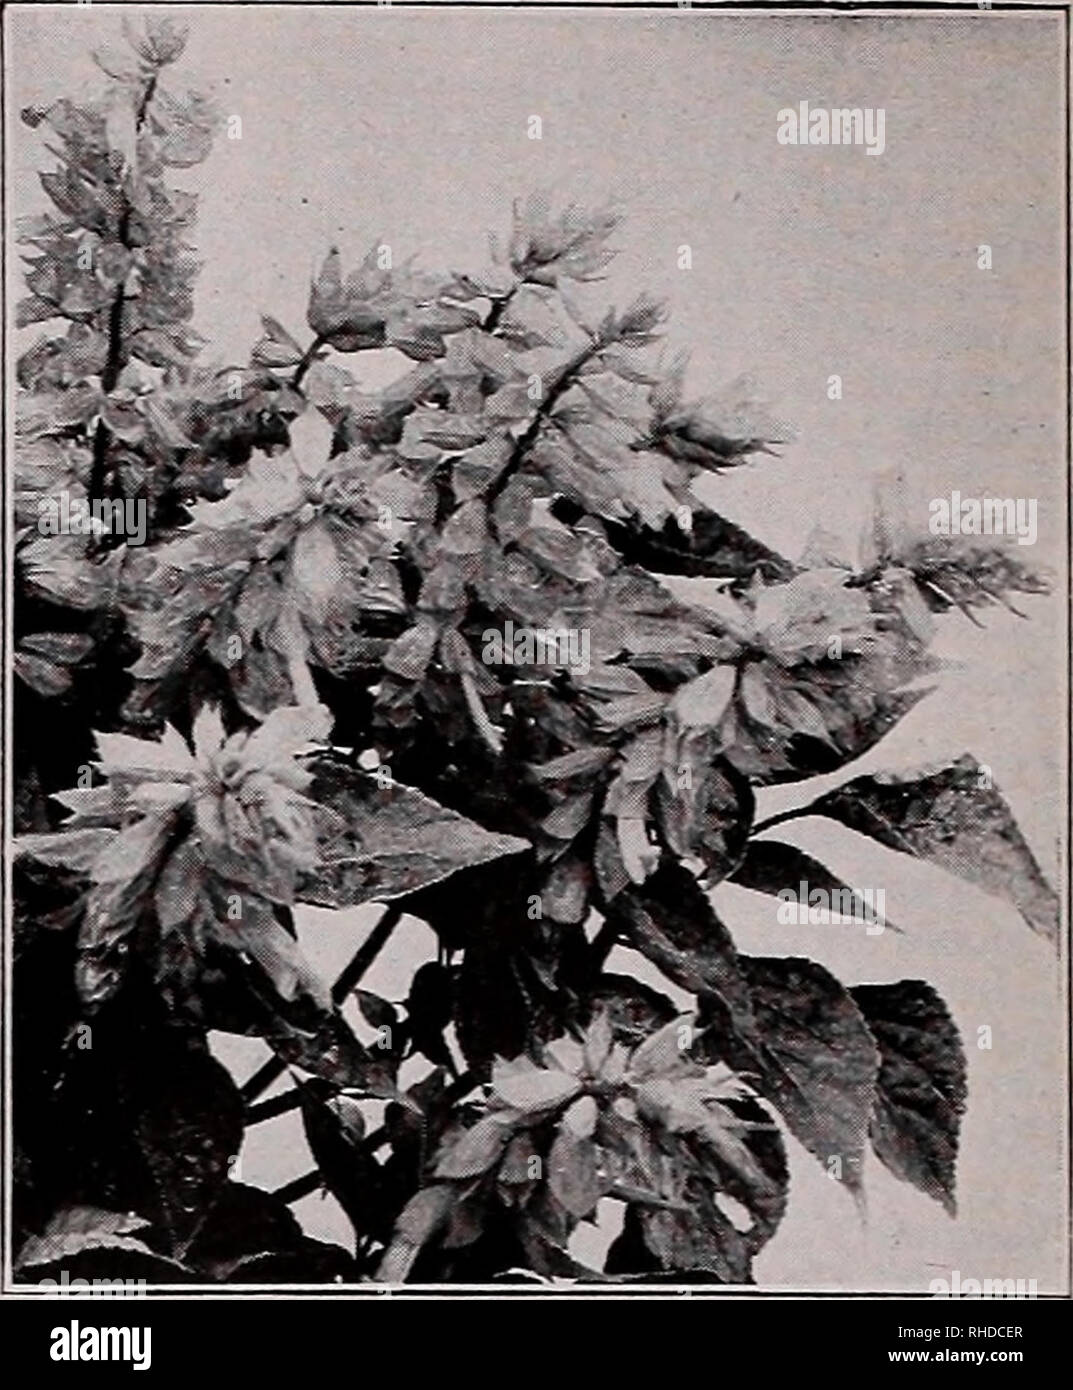 . Book for florists : spring 1934. Flowers Seeds Catalogs; Bulbs (Plants) Seedlings Catalogs; Vegetables Seeds Catalogs; Trees Seeds Catalogs; Horticulture Equipment and supplies Catalogs. PRIMULA Obconica Grandiflora Trade pkt .50 .50 .50 Primula Obconica Gigantea Rosea. Fine J^2 oz., $1.80 $0.50 Salmon Queen. 8 in &amp; oz., 2.00 1.00 Mixed J^oz., 1.50 Grandiflora Alba. White ^ oz., 1.80 Appleblossom. Pink &quot;Better Days.&quot; A new color—deep carmine red. The darkest and most pleasing Primula Obcon- ica Grandiflora yet produced. Very large flower- ing and an important rival to Fassbend Stock Photo